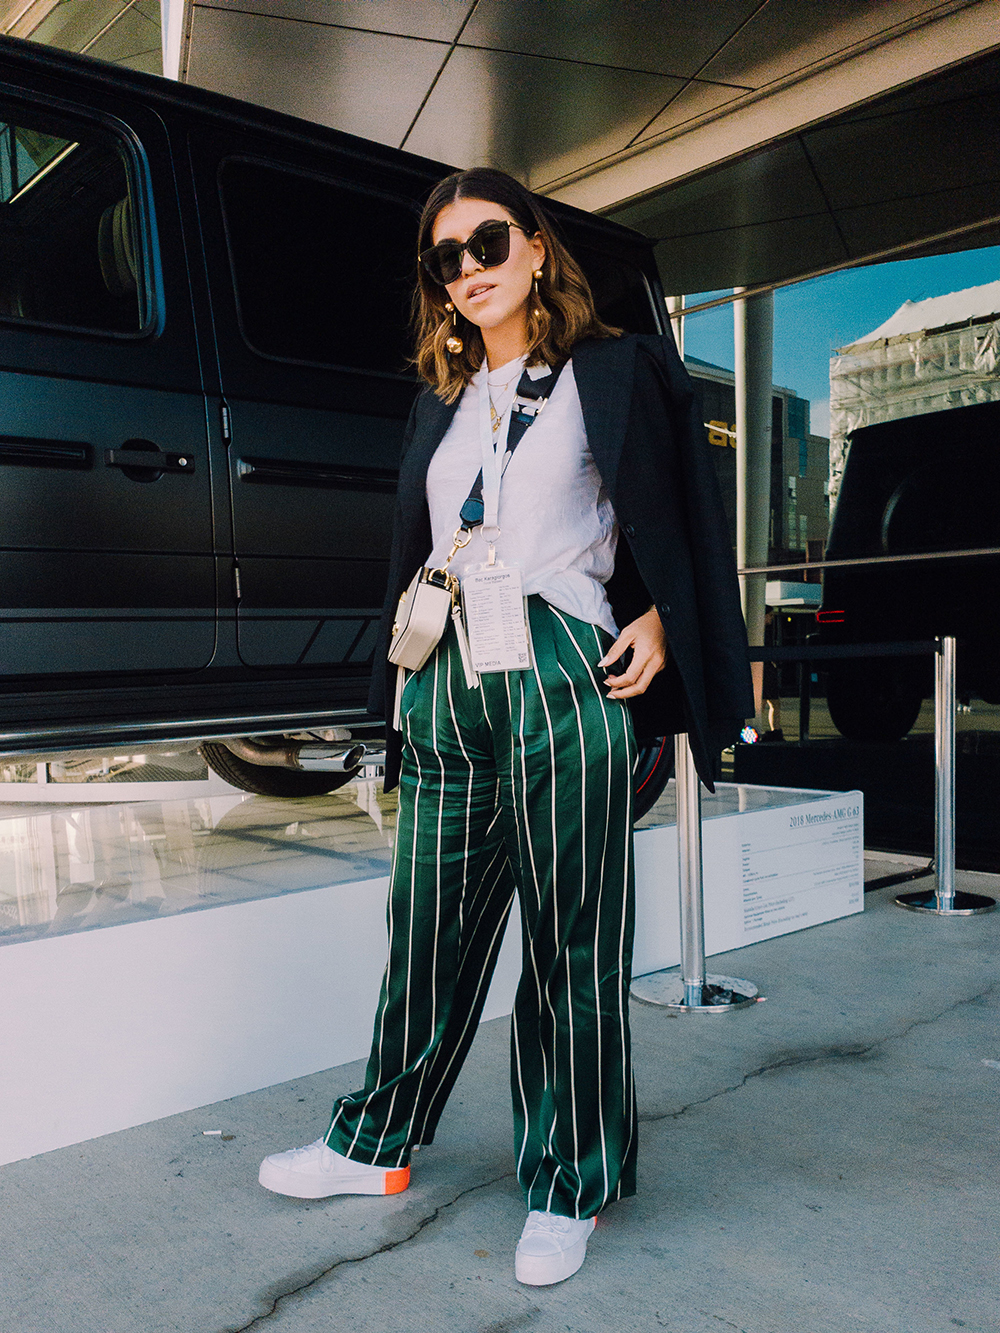 Street style at NZFW 2018: Wednesday taken on the new Samsung Galaxy Note9 by Jared Donkin